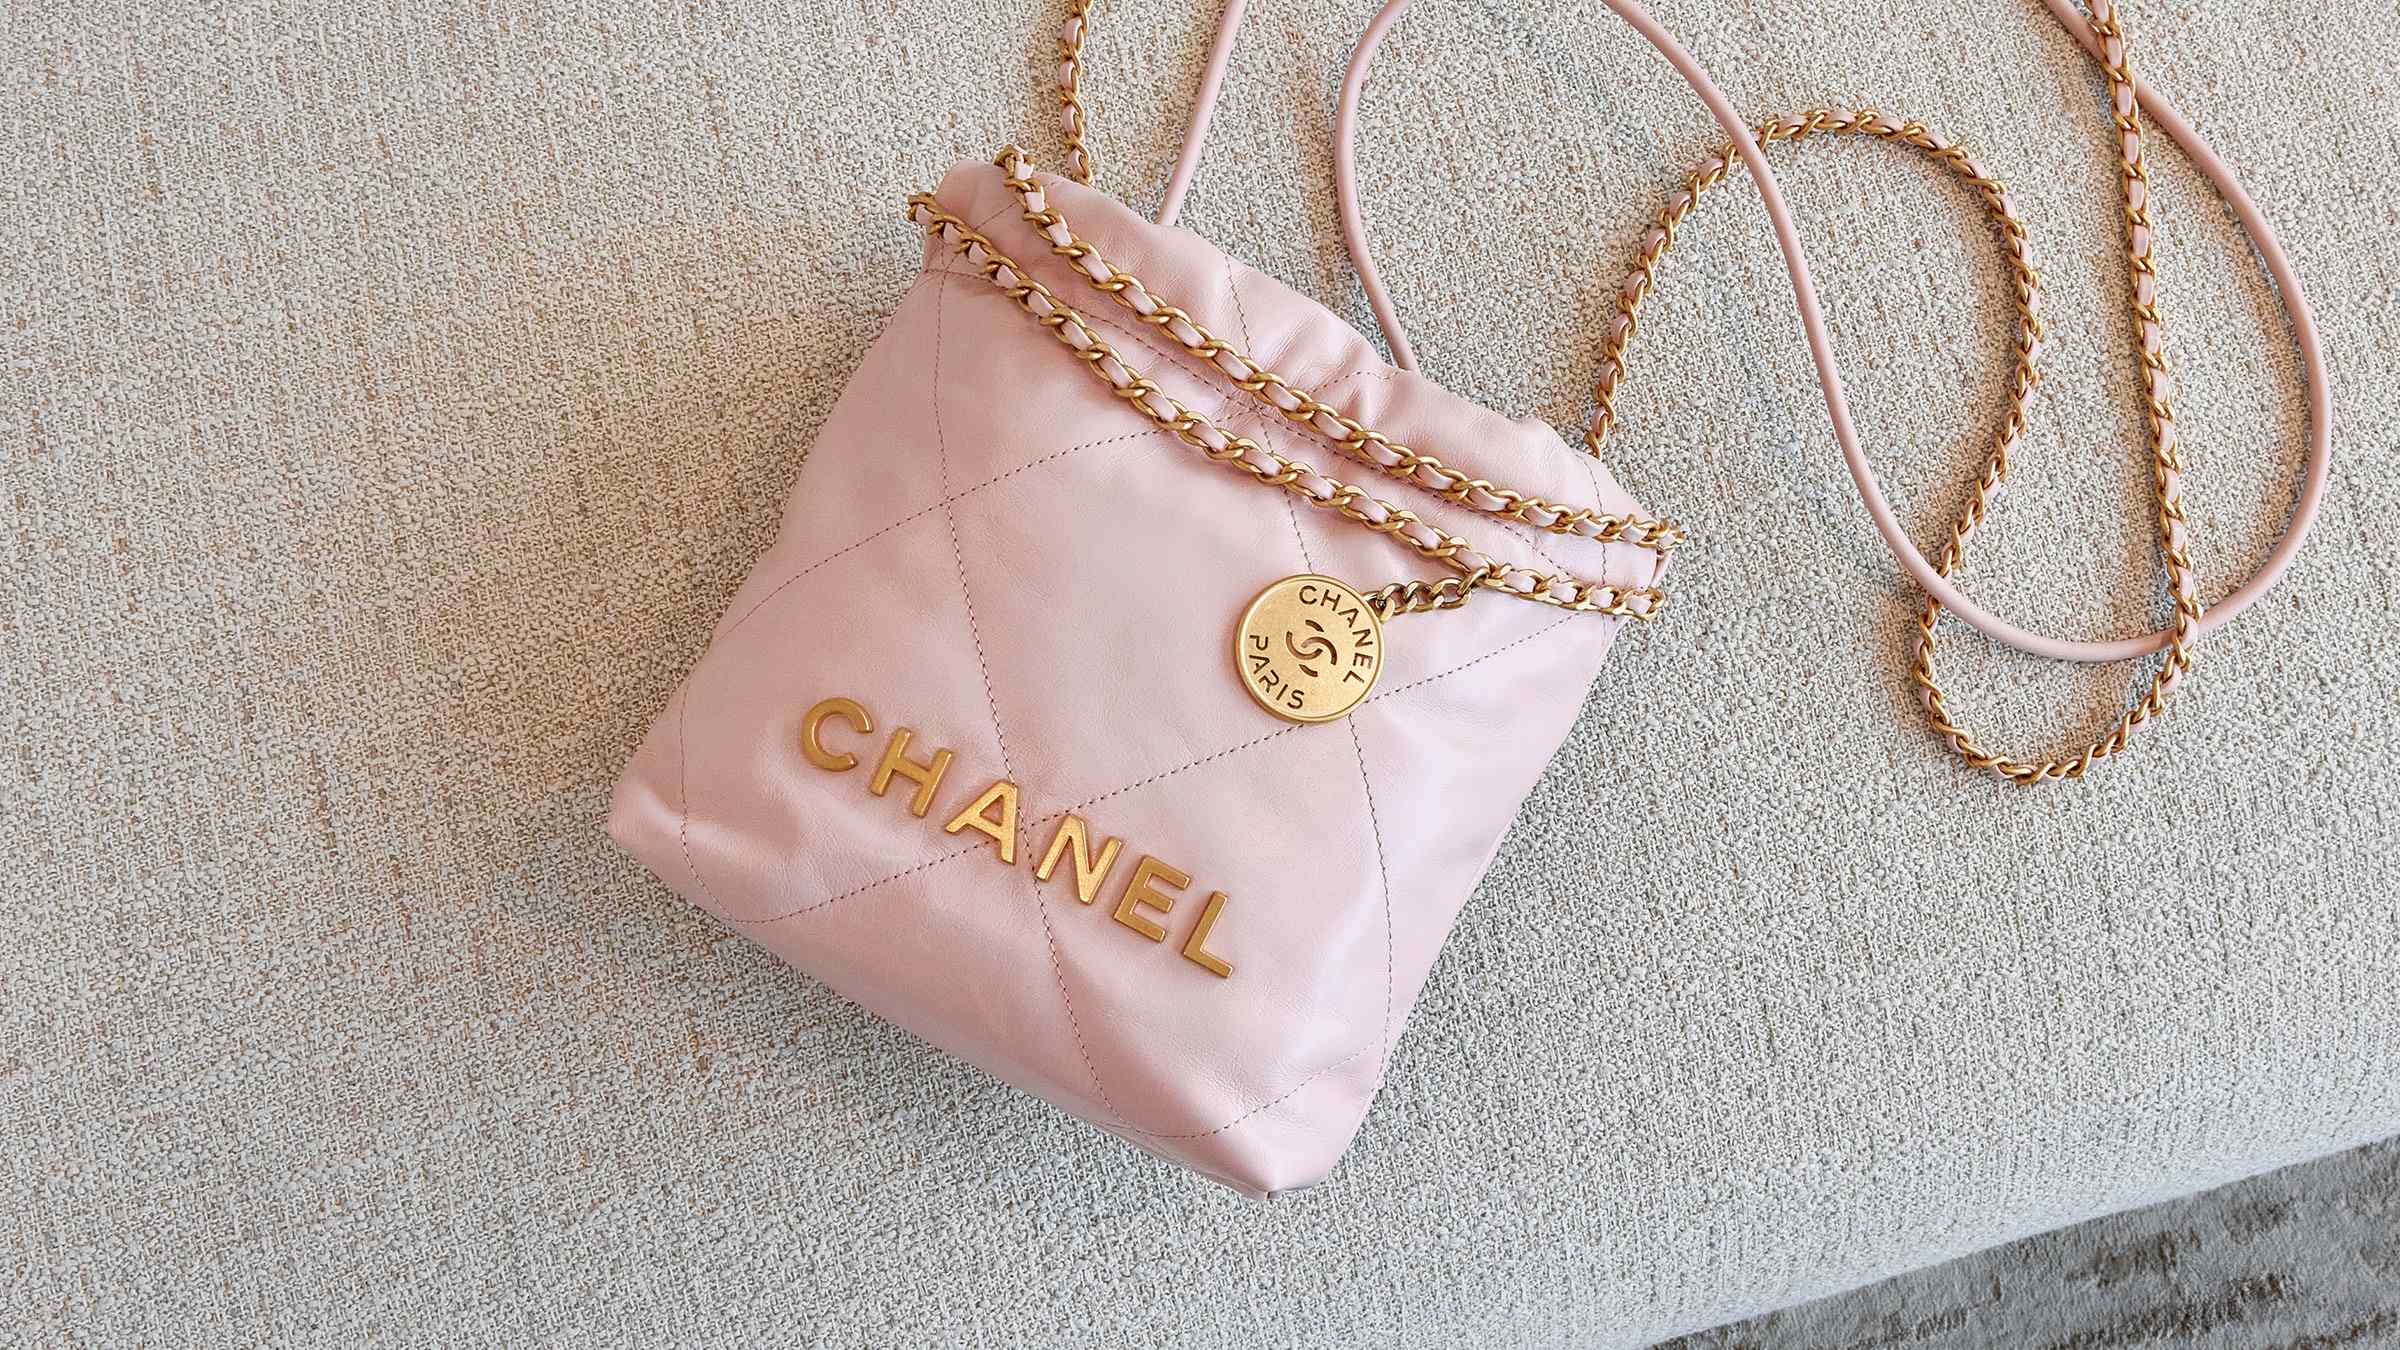 CHANEL VIP GIFT 2023 UNBOXING  HOW TO BECOME A CHANEL VIP